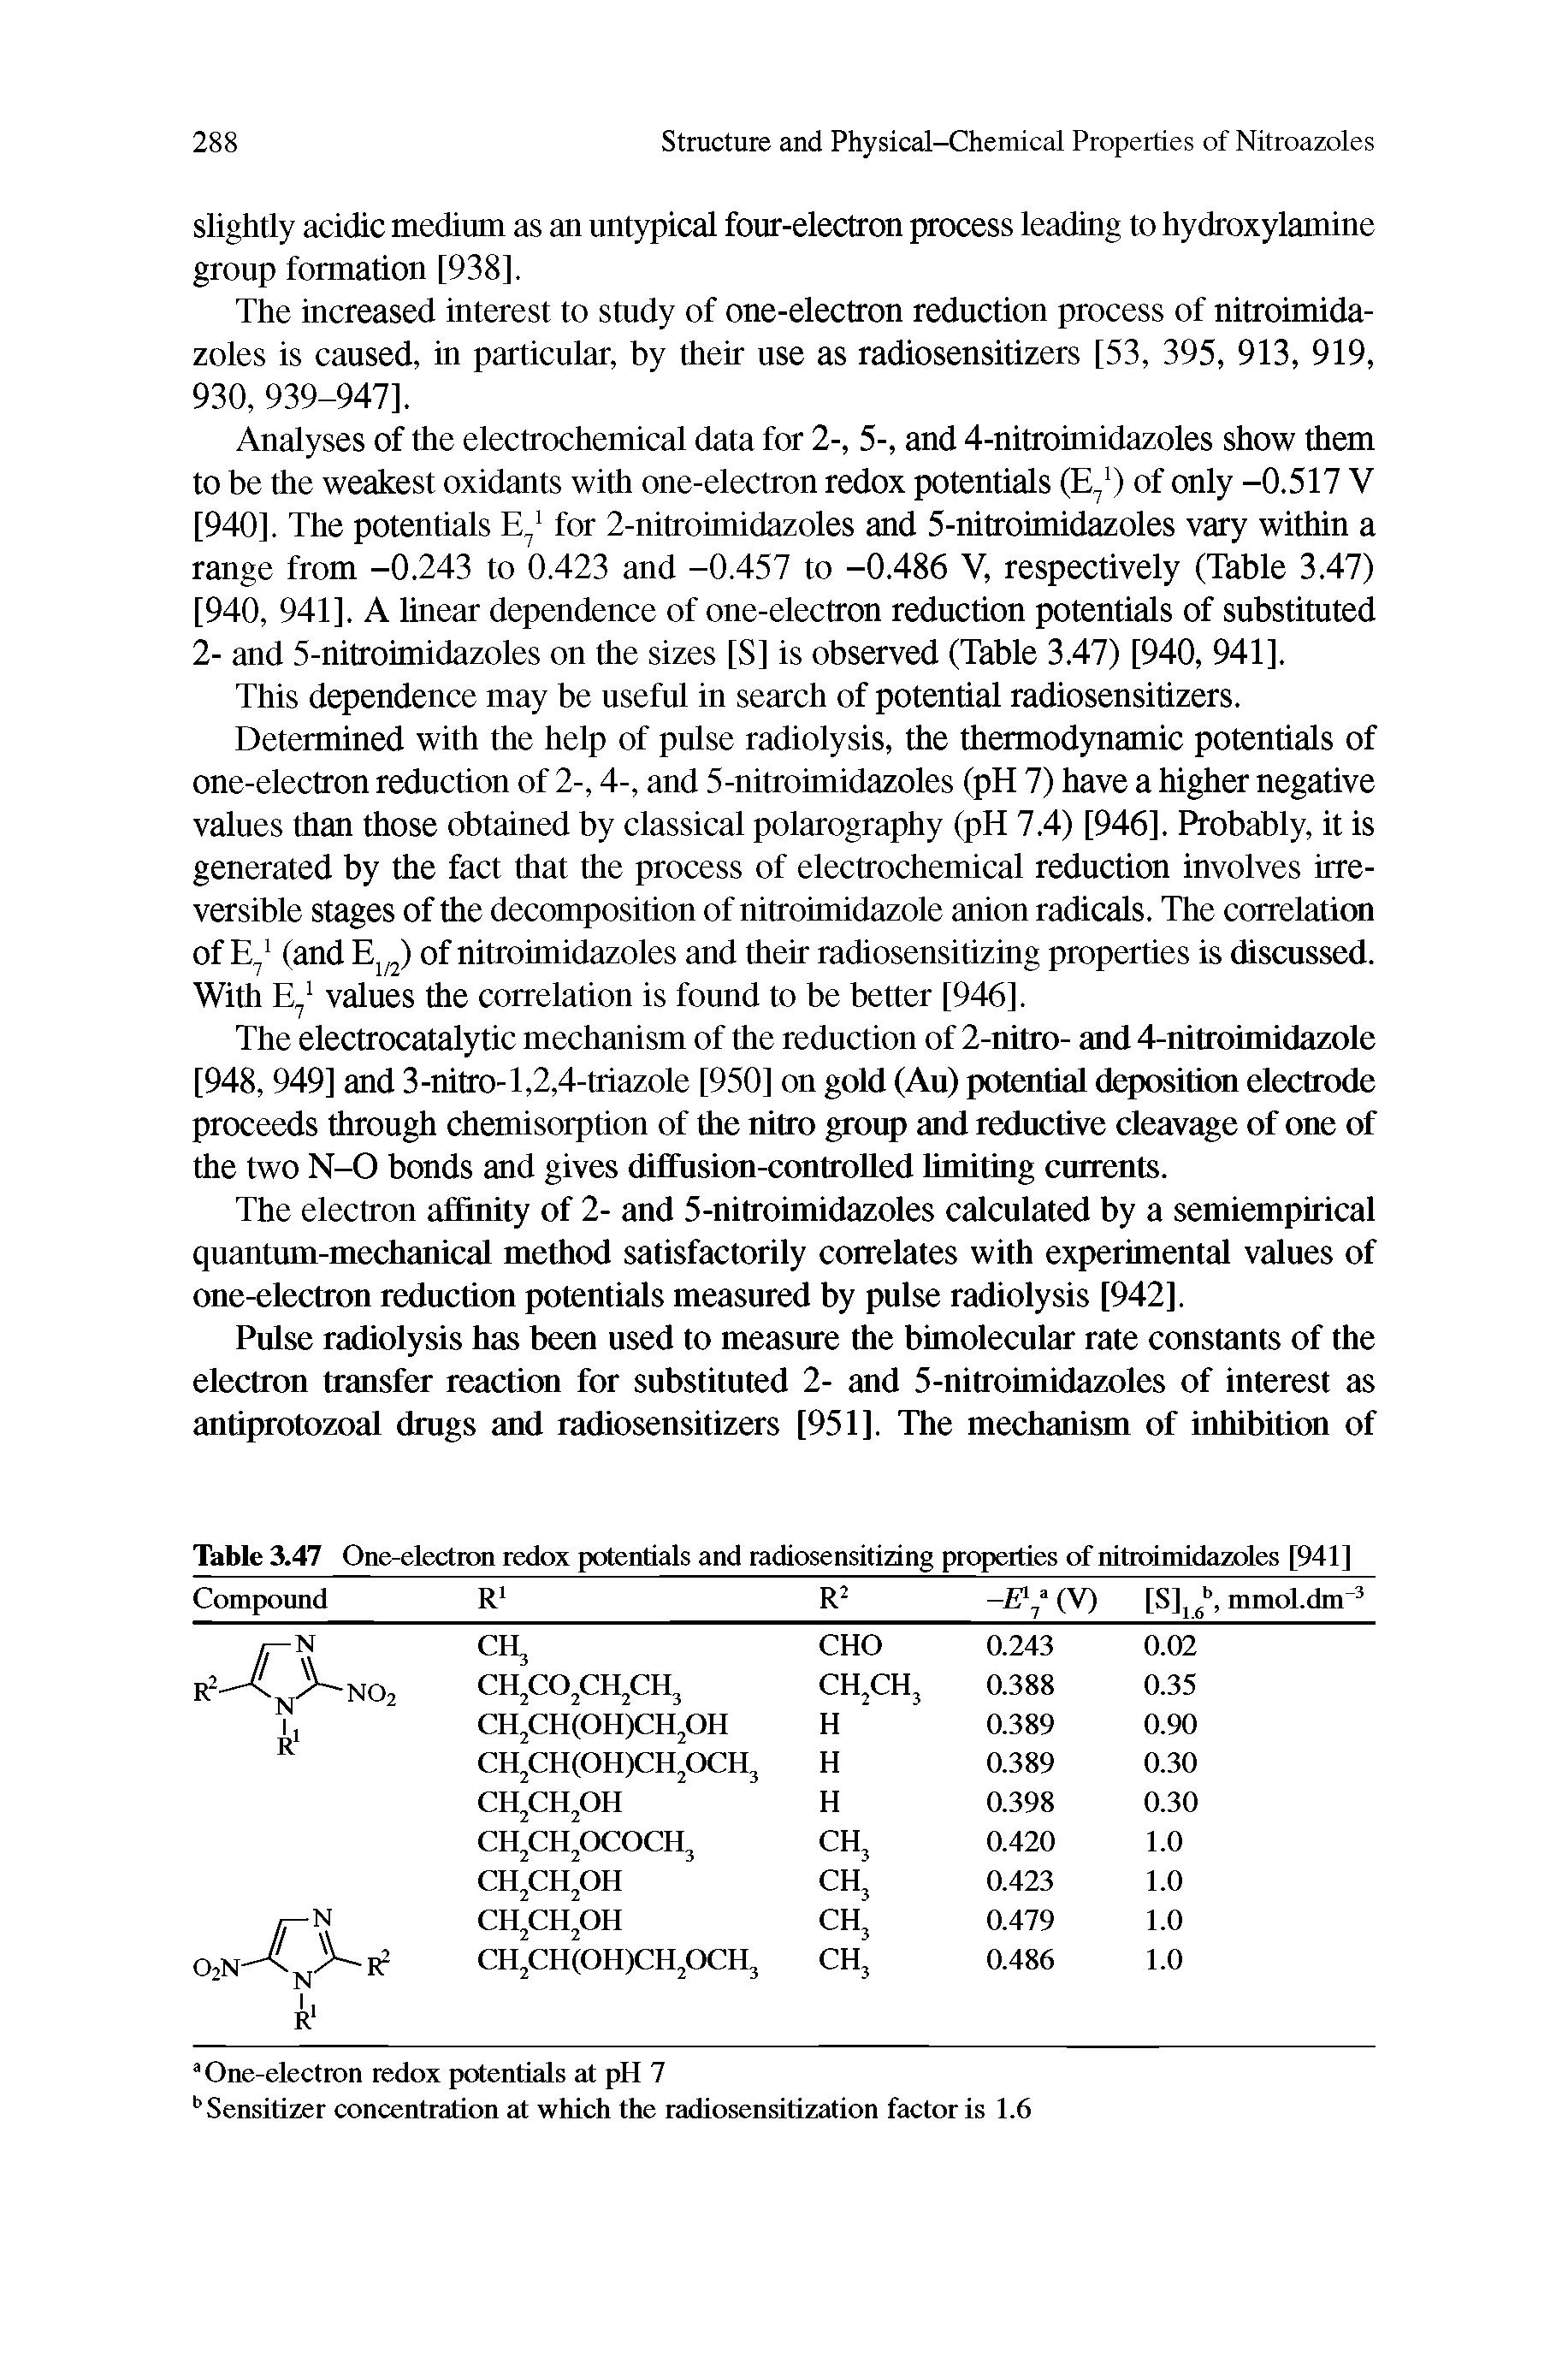 Table 3.47 One-electron redox potentials and radiosensitizing properties of nitroimidazoles [941]...